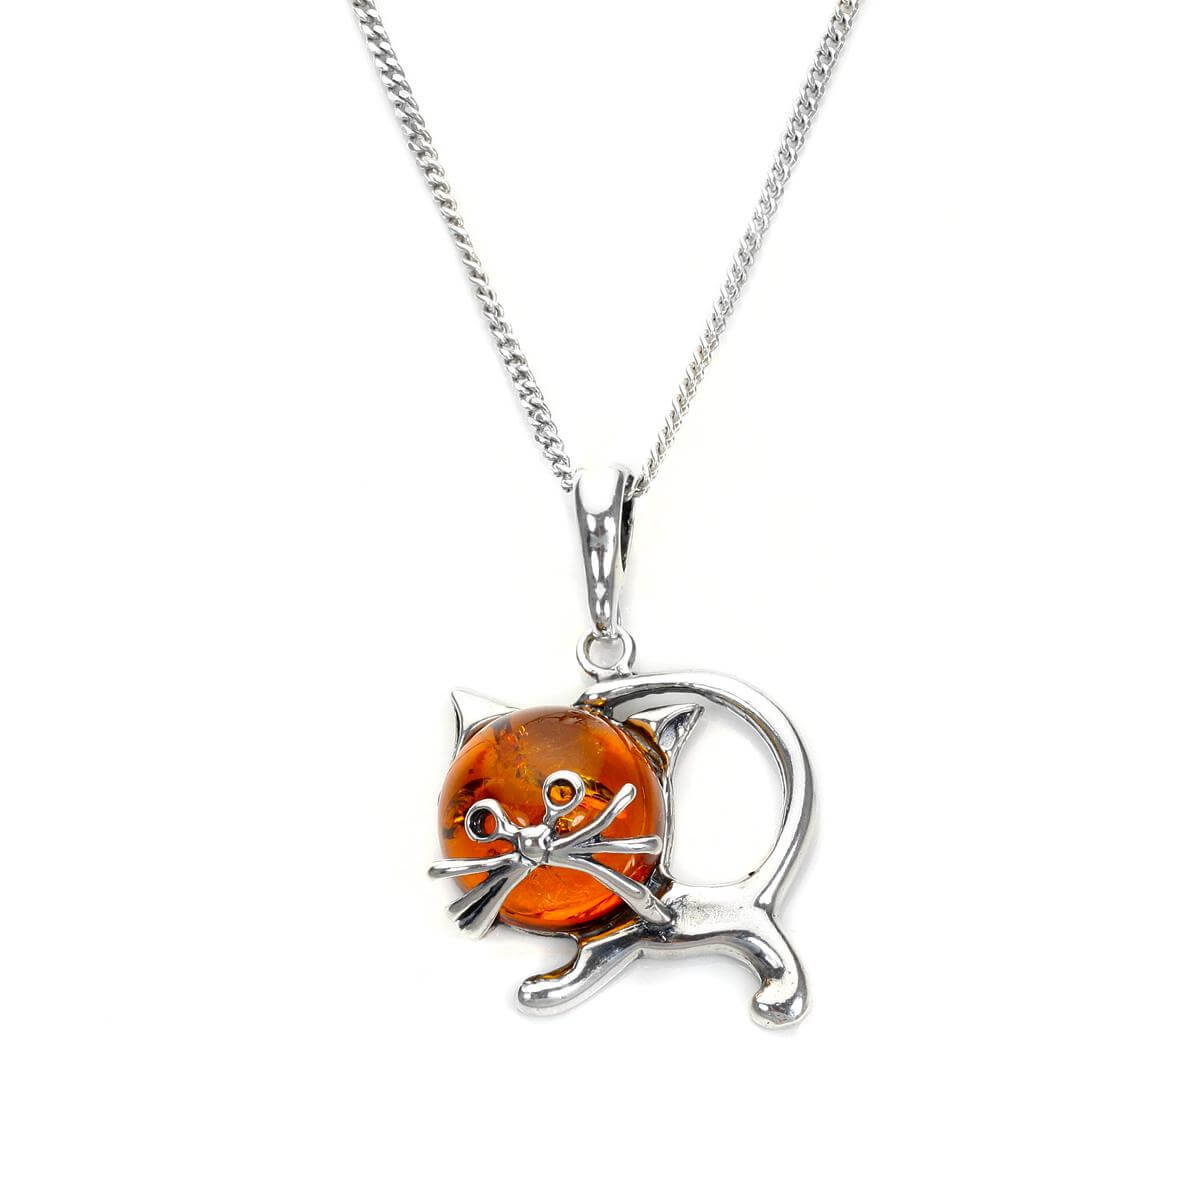 Sterling Silver & Baltic Amber Cat Pendant - 16 - 22 Inches